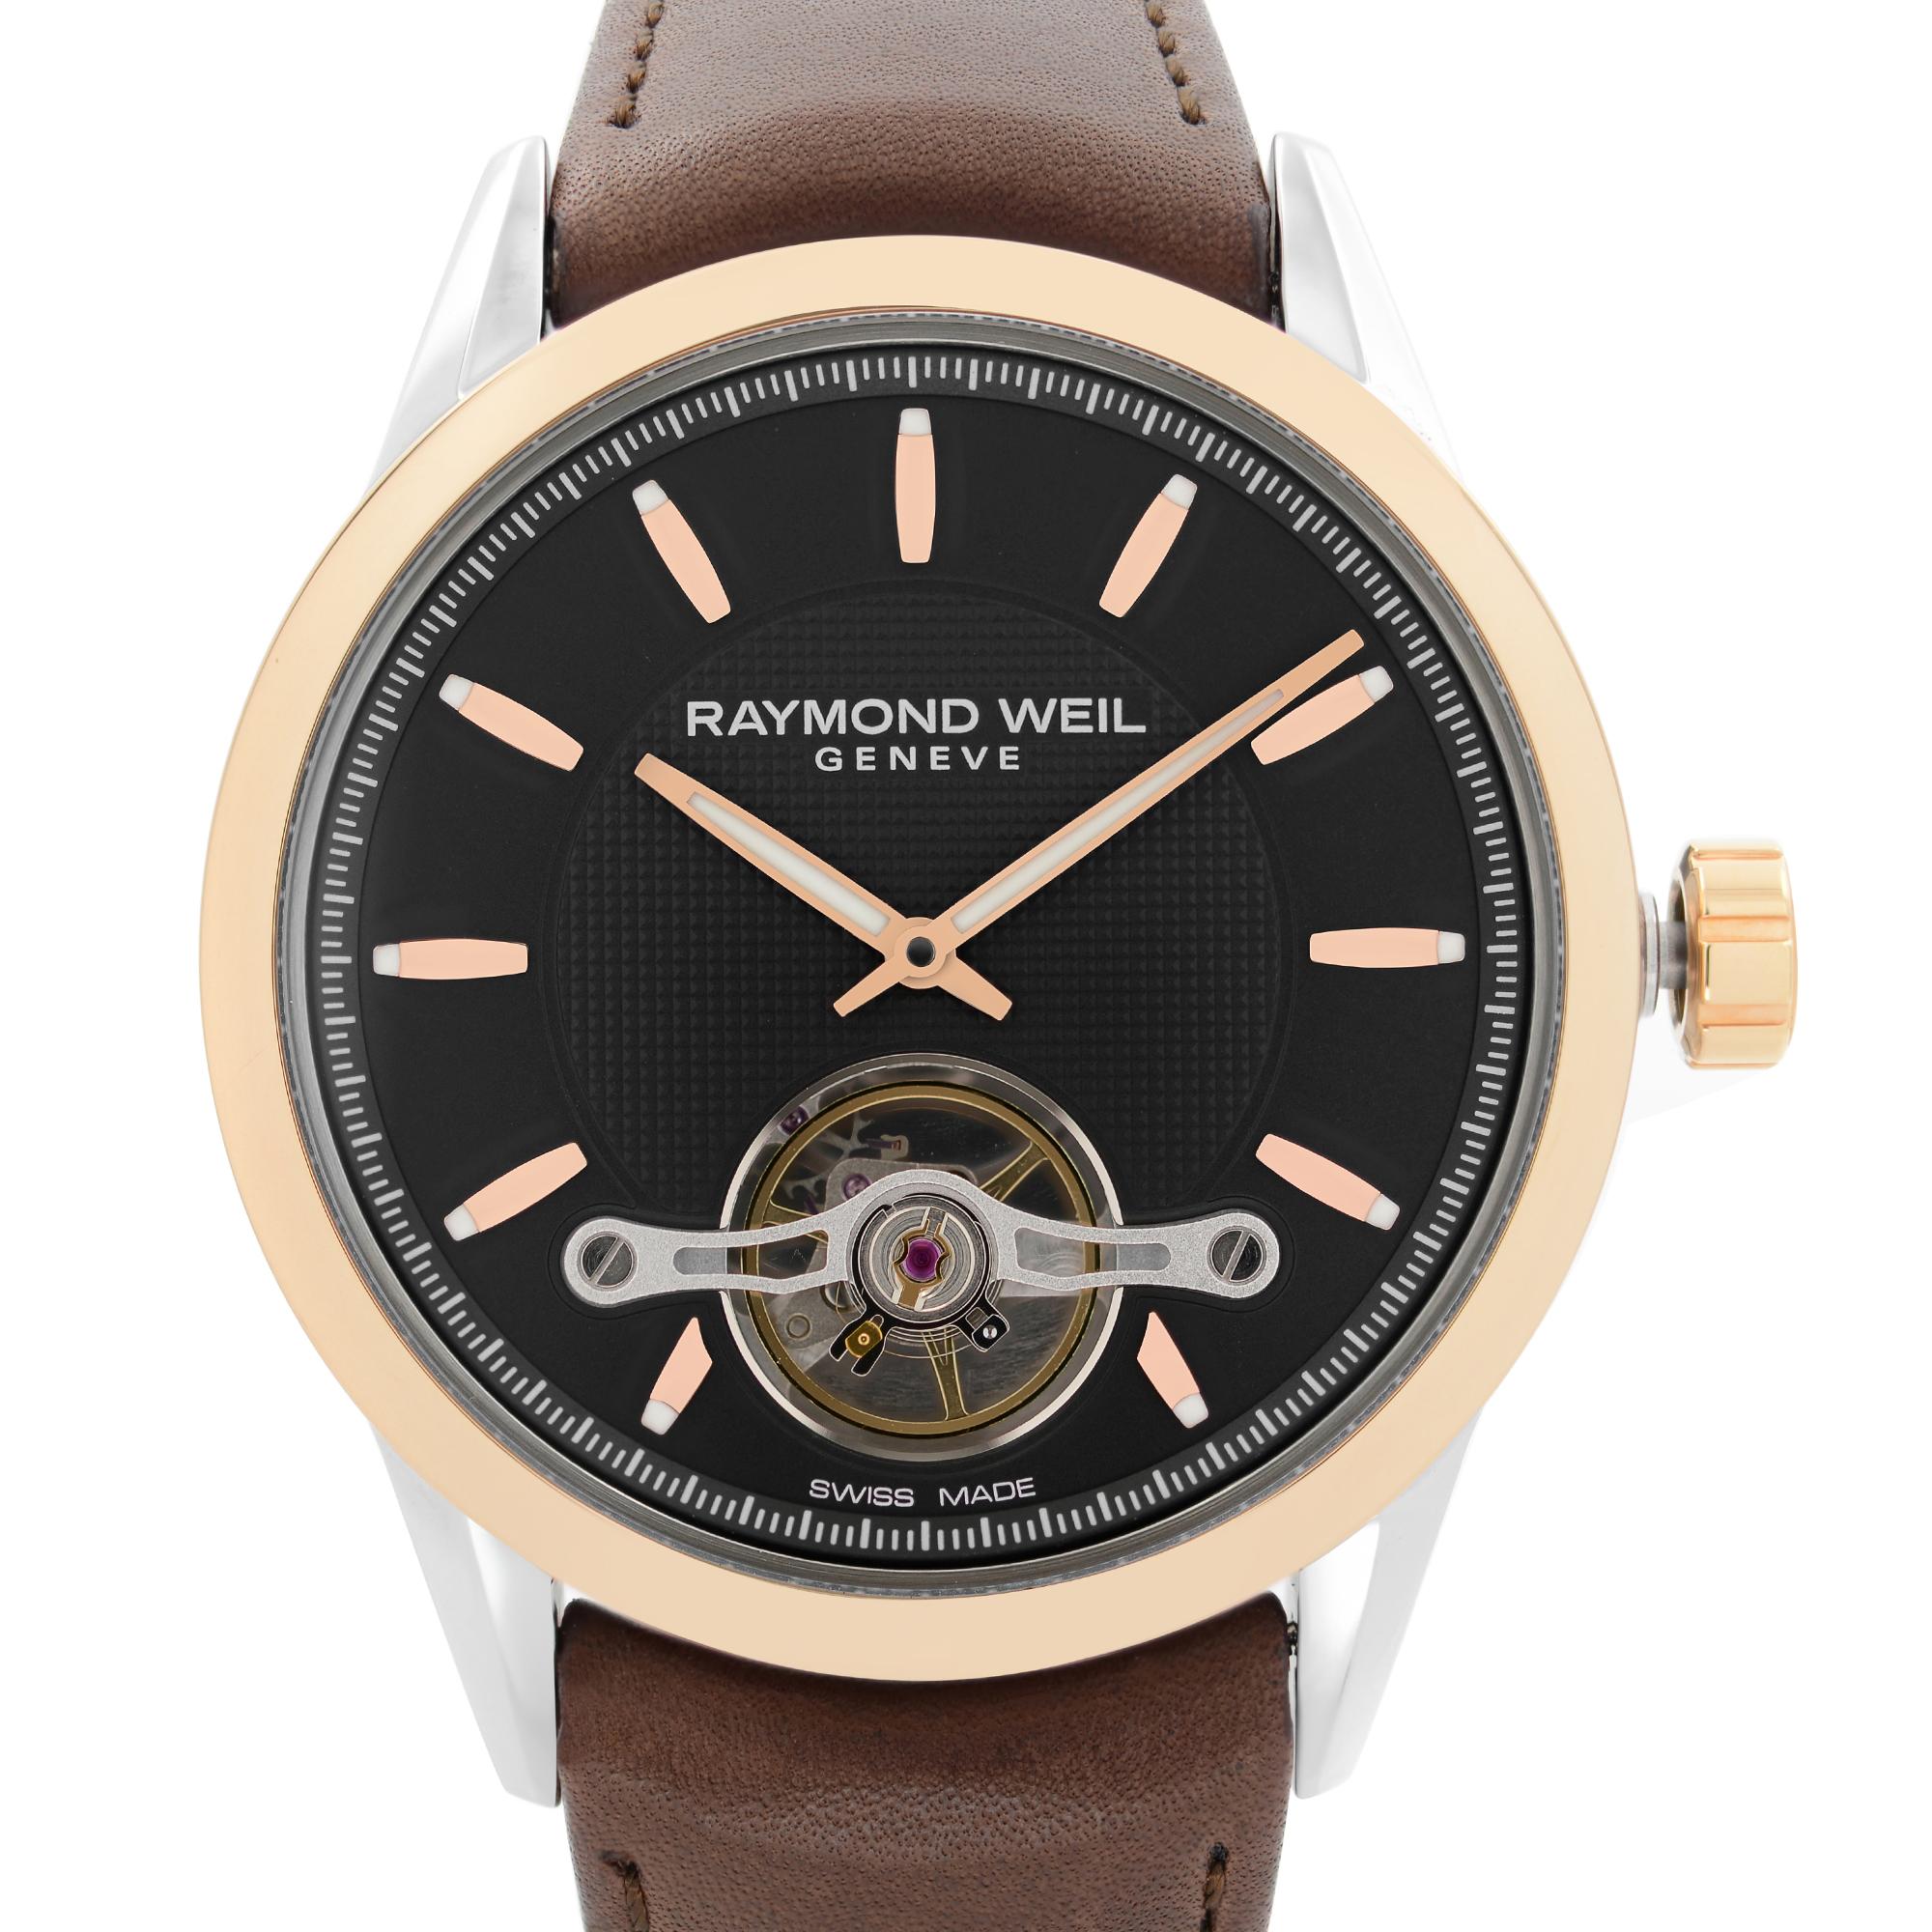 New with defects Never Worn Have minor dents and micro scratches on gold-tone parts. minor glue signs on the band.  Raymond Weil Freelancer 42.5mm Steel Brown Leather Black Openworked Index Dial Automatic Men's Classic Watch. The bezel of this watch